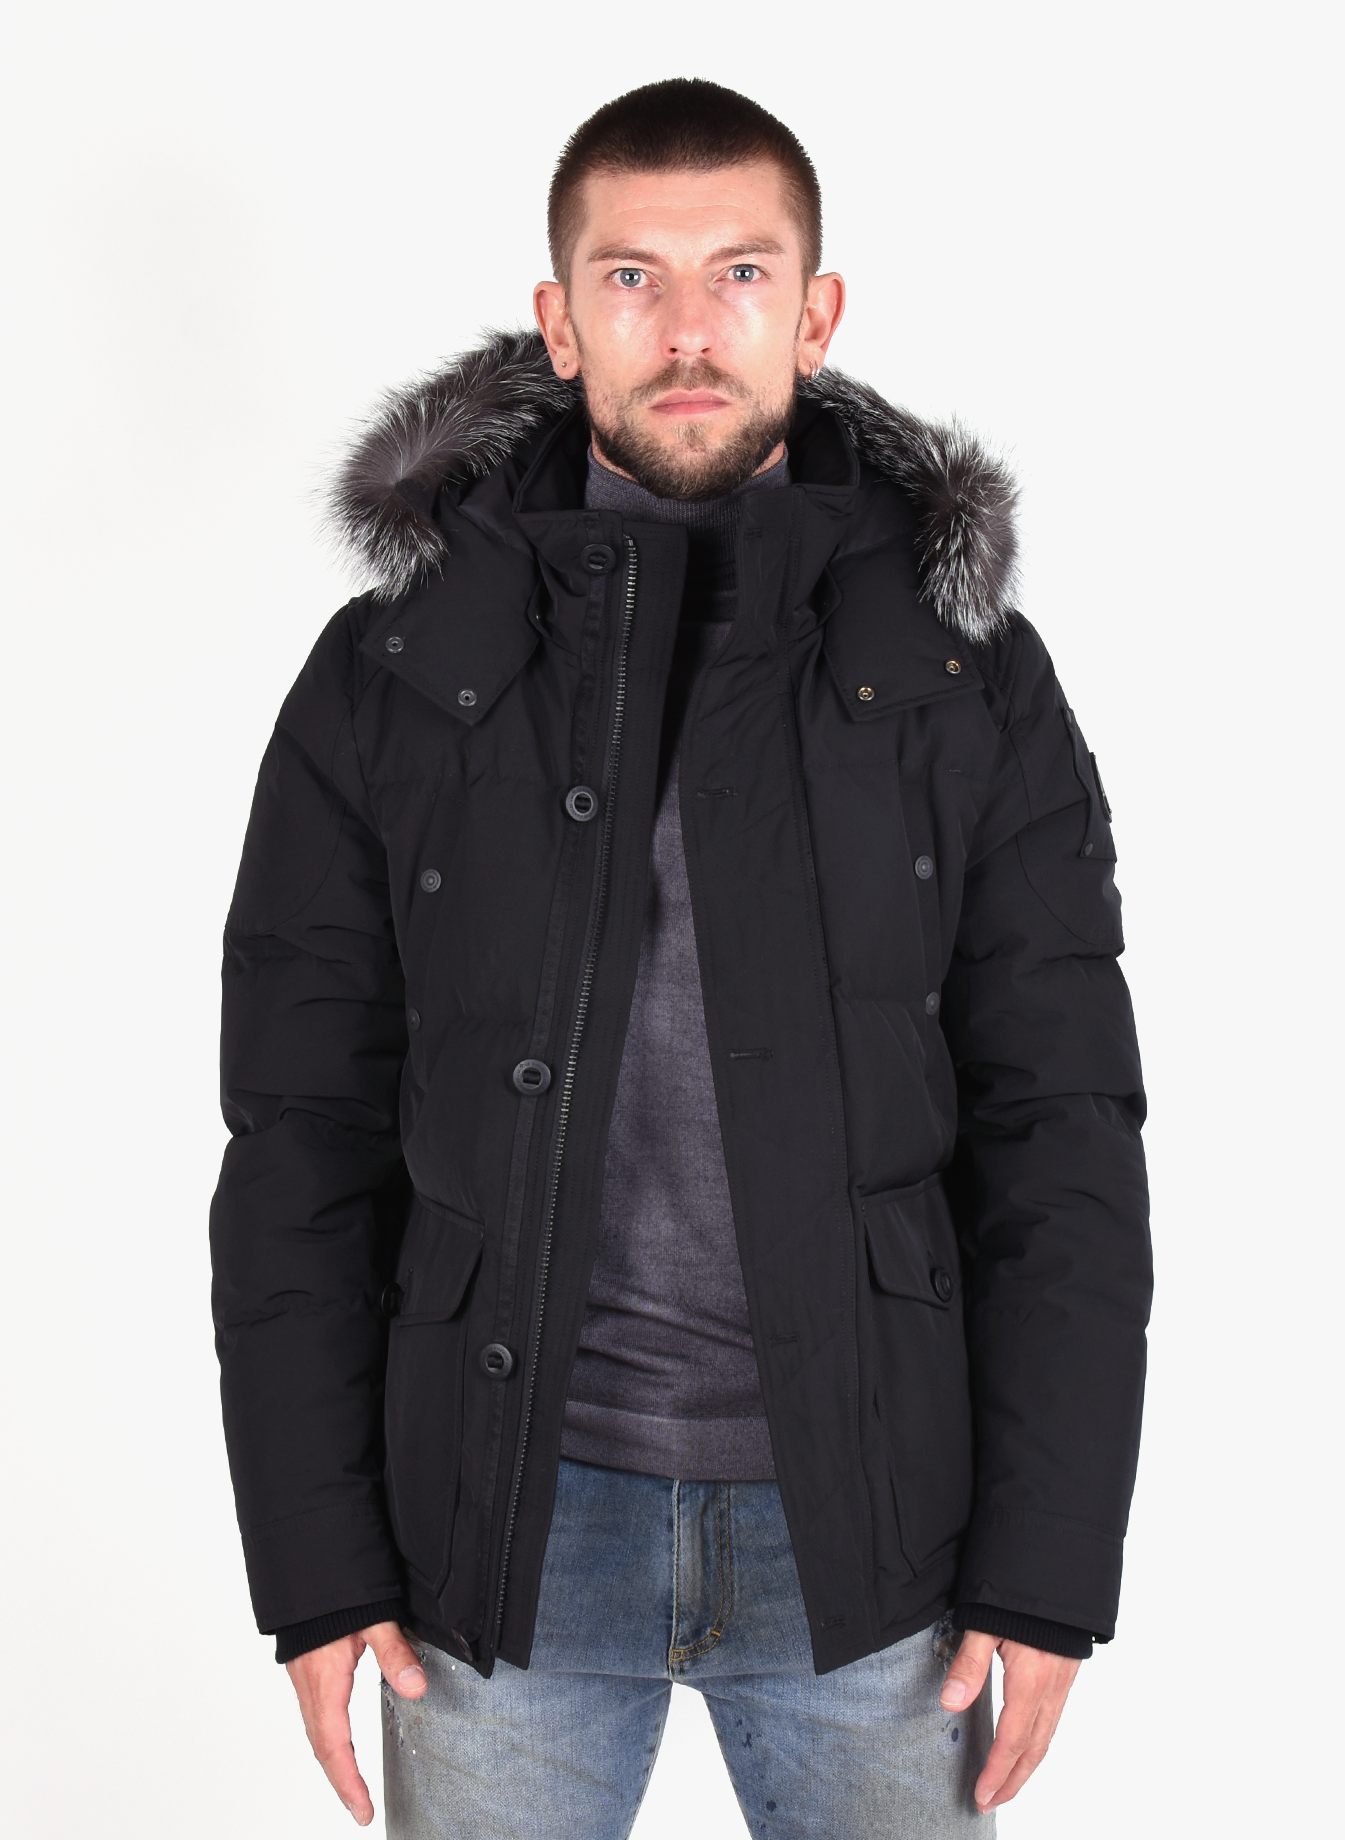 Moose Knuckles 'Round Island' Jacket Black Frost FW19 - Mensquare